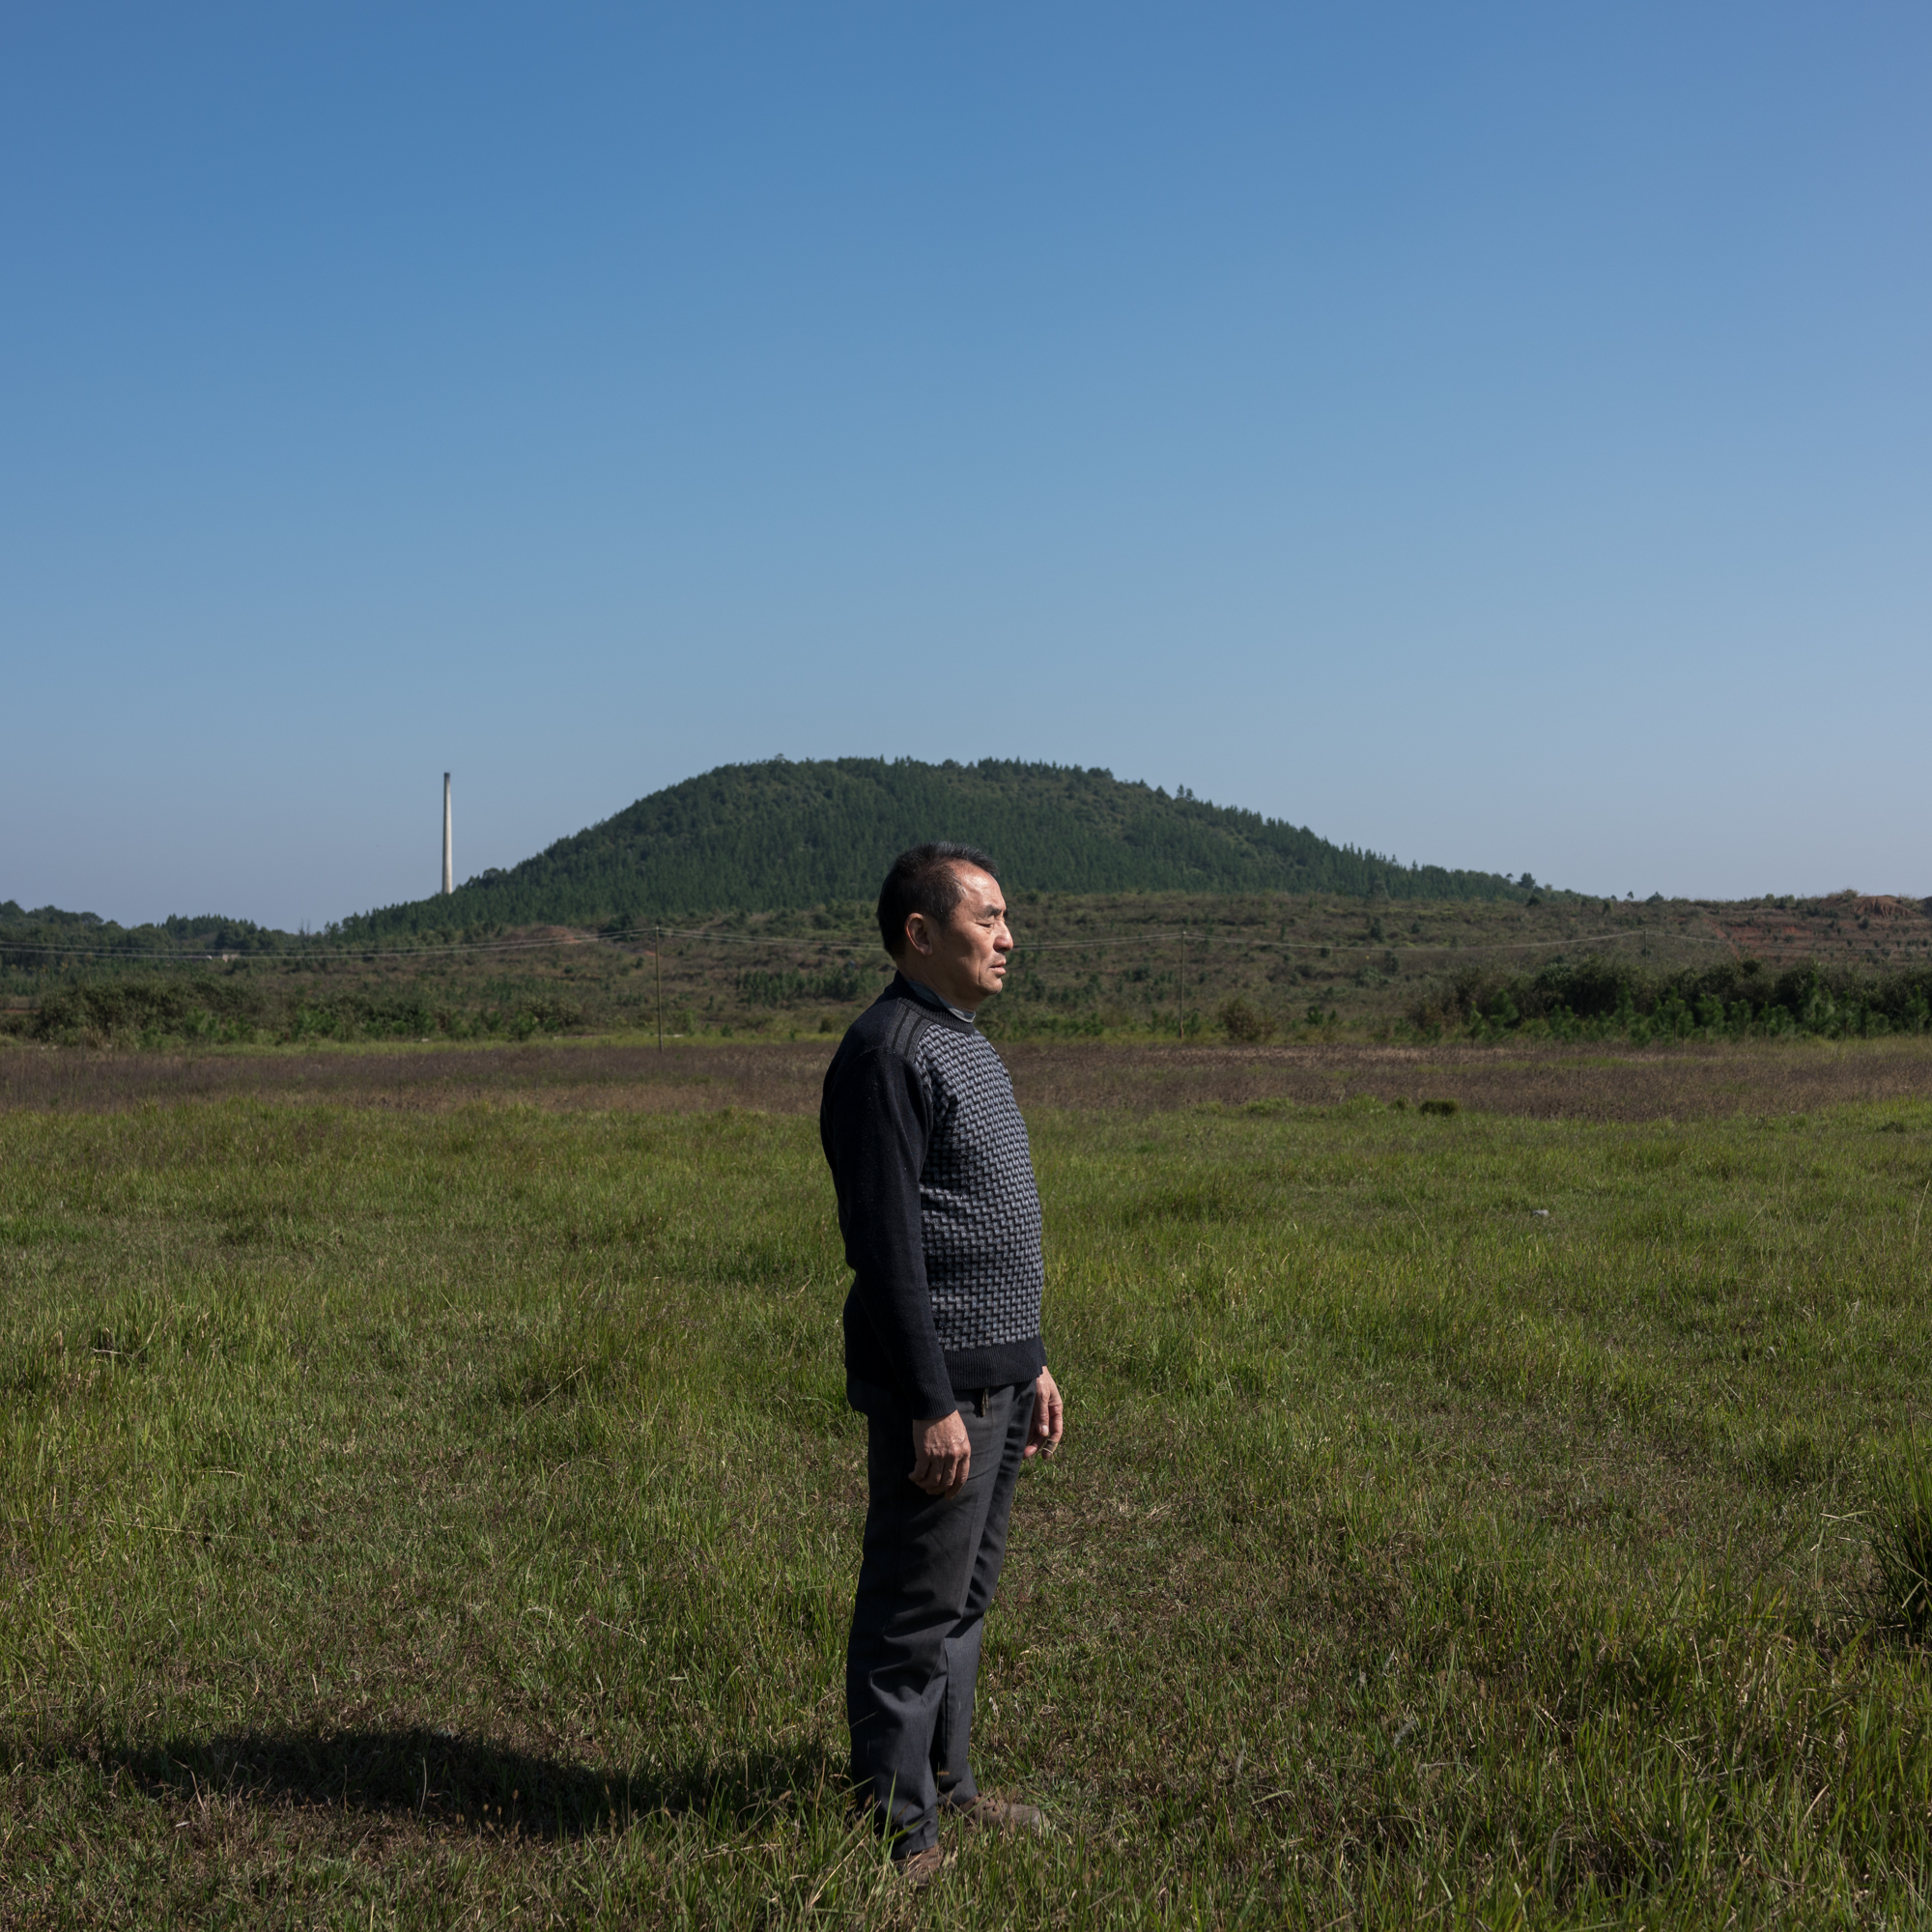 Li Dongde, a school teacher, stands at the execution grounds where his father, Li Jingxi, was shot by militiamen in August 1967. “This is where he was killed and his body lined up with others,” he said quietly before standing for this portrait. “Some of the dead were dumped in the Yongming River because their families didn’t dare collect their bodies.” His father had been accused of being a landlord. Later, he was cleared of any wrongdoing but he has not received redress.